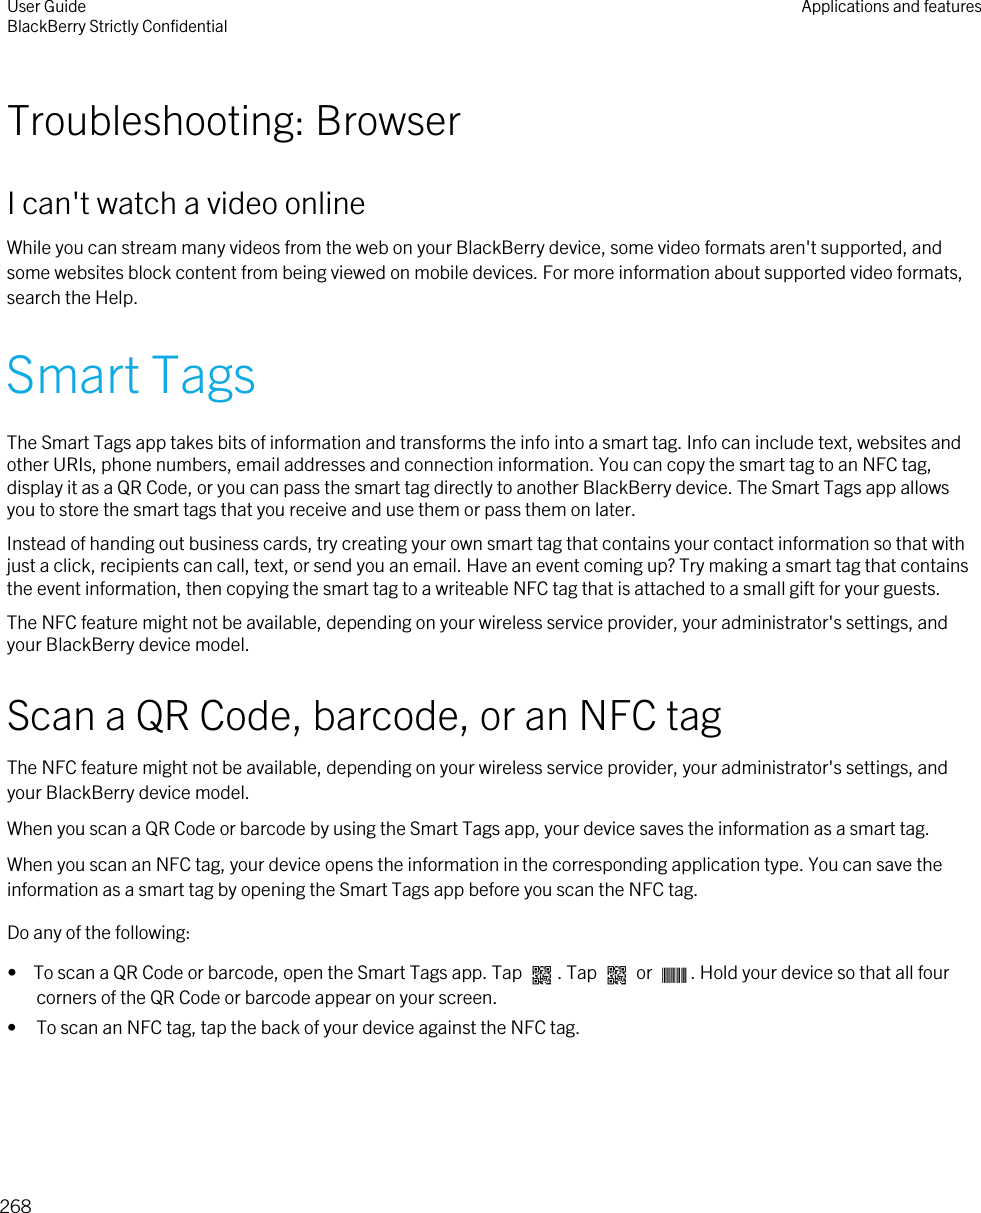 Troubleshooting: BrowserI can&apos;t watch a video onlineWhile you can stream many videos from the web on your BlackBerry device, some video formats aren&apos;t supported, and some websites block content from being viewed on mobile devices. For more information about supported video formats, search the Help.Smart TagsThe Smart Tags app takes bits of information and transforms the info into a smart tag. Info can include text, websites and other URIs, phone numbers, email addresses and connection information. You can copy the smart tag to an NFC tag, display it as a QR Code, or you can pass the smart tag directly to another BlackBerry device. The Smart Tags app allows you to store the smart tags that you receive and use them or pass them on later.Instead of handing out business cards, try creating your own smart tag that contains your contact information so that with just a click, recipients can call, text, or send you an email. Have an event coming up? Try making a smart tag that contains the event information, then copying the smart tag to a writeable NFC tag that is attached to a small gift for your guests.The NFC feature might not be available, depending on your wireless service provider, your administrator&apos;s settings, and your BlackBerry device model.Scan a QR Code, barcode, or an NFC tagThe NFC feature might not be available, depending on your wireless service provider, your administrator&apos;s settings, and your BlackBerry device model.When you scan a QR Code or barcode by using the Smart Tags app, your device saves the information as a smart tag.When you scan an NFC tag, your device opens the information in the corresponding application type. You can save the information as a smart tag by opening the Smart Tags app before you scan the NFC tag.Do any of the following:•  To scan a QR Code or barcode, open the Smart Tags app. Tap  . Tap   or  . Hold your device so that all four corners of the QR Code or barcode appear on your screen.• To scan an NFC tag, tap the back of your device against the NFC tag. User GuideBlackBerry Strictly Confidential Applications and features268